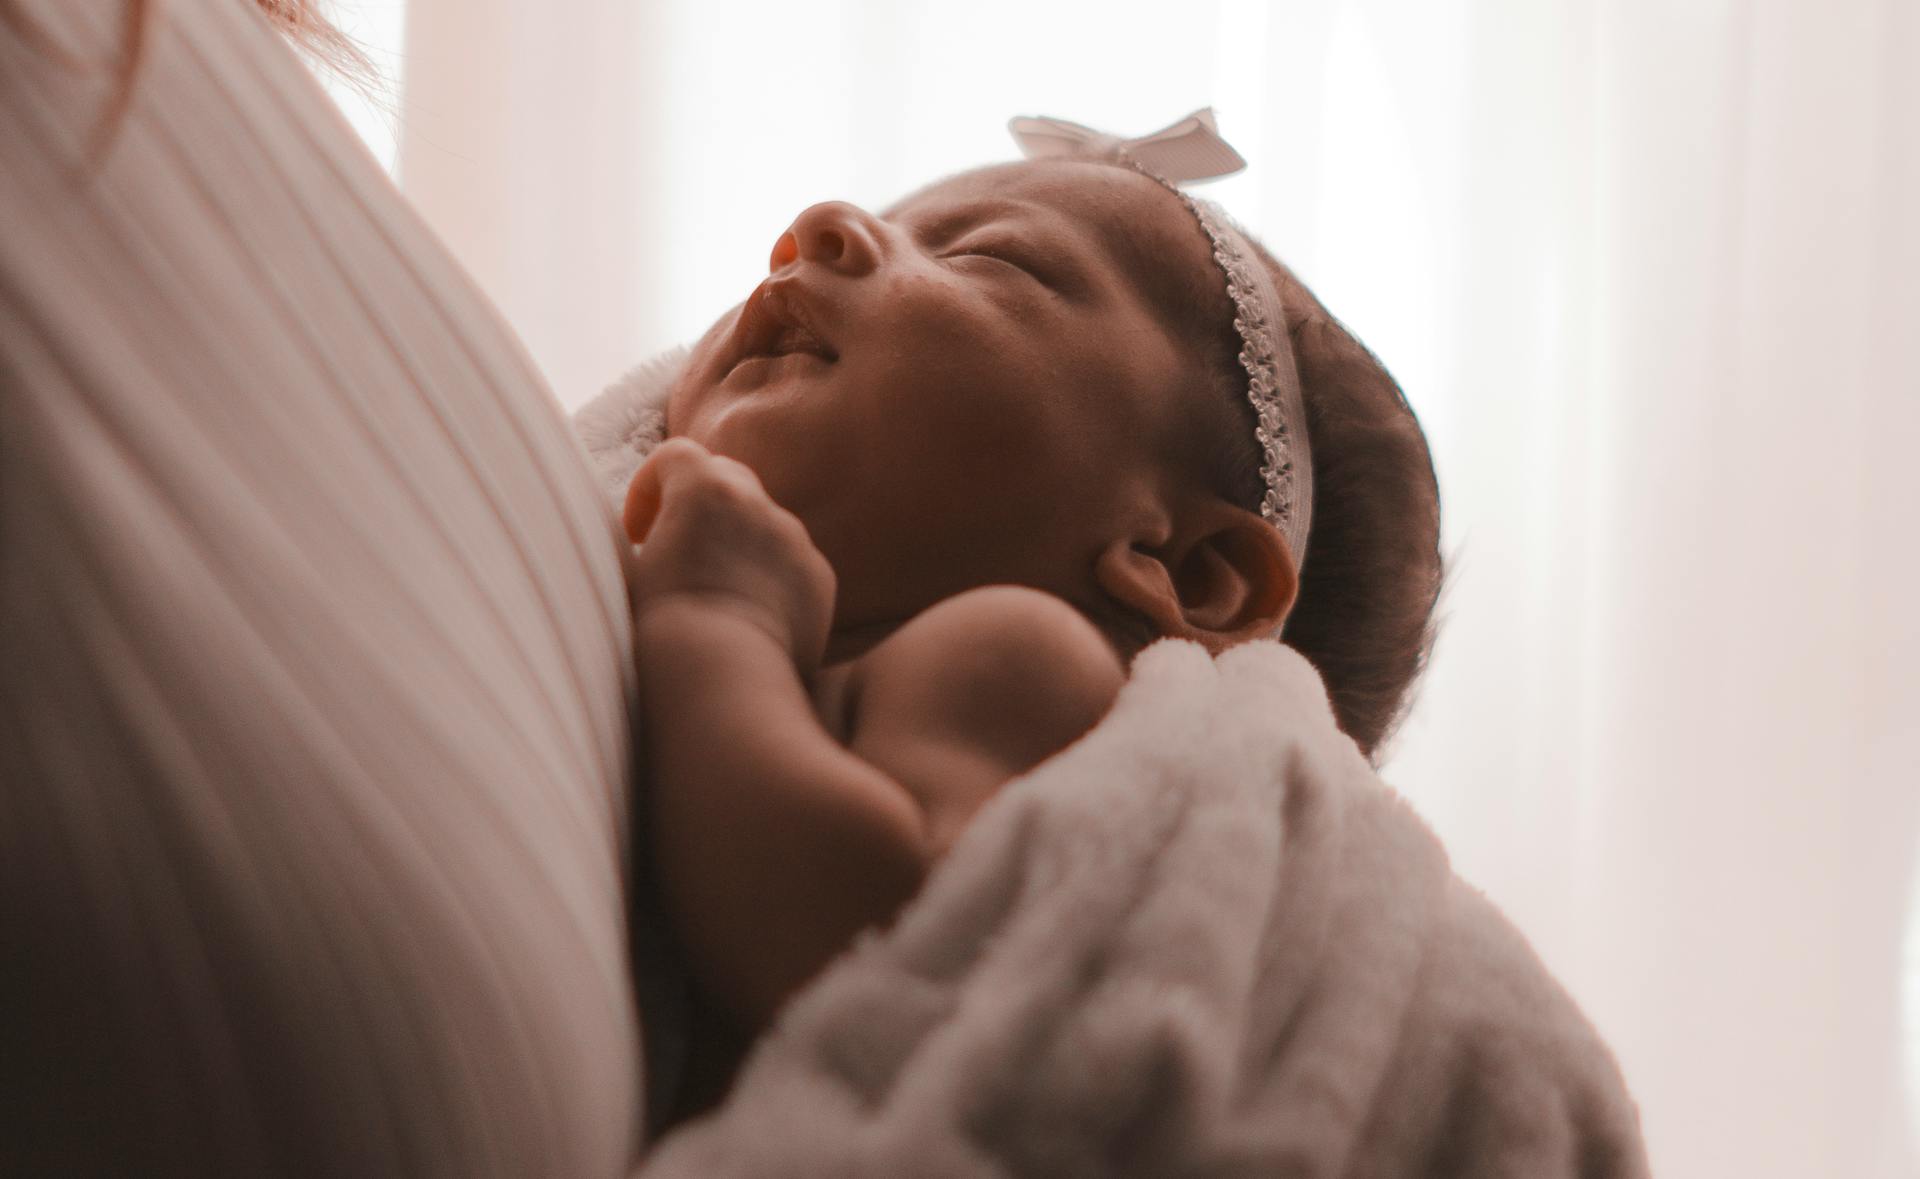 A person holding a baby | Source: Pexels